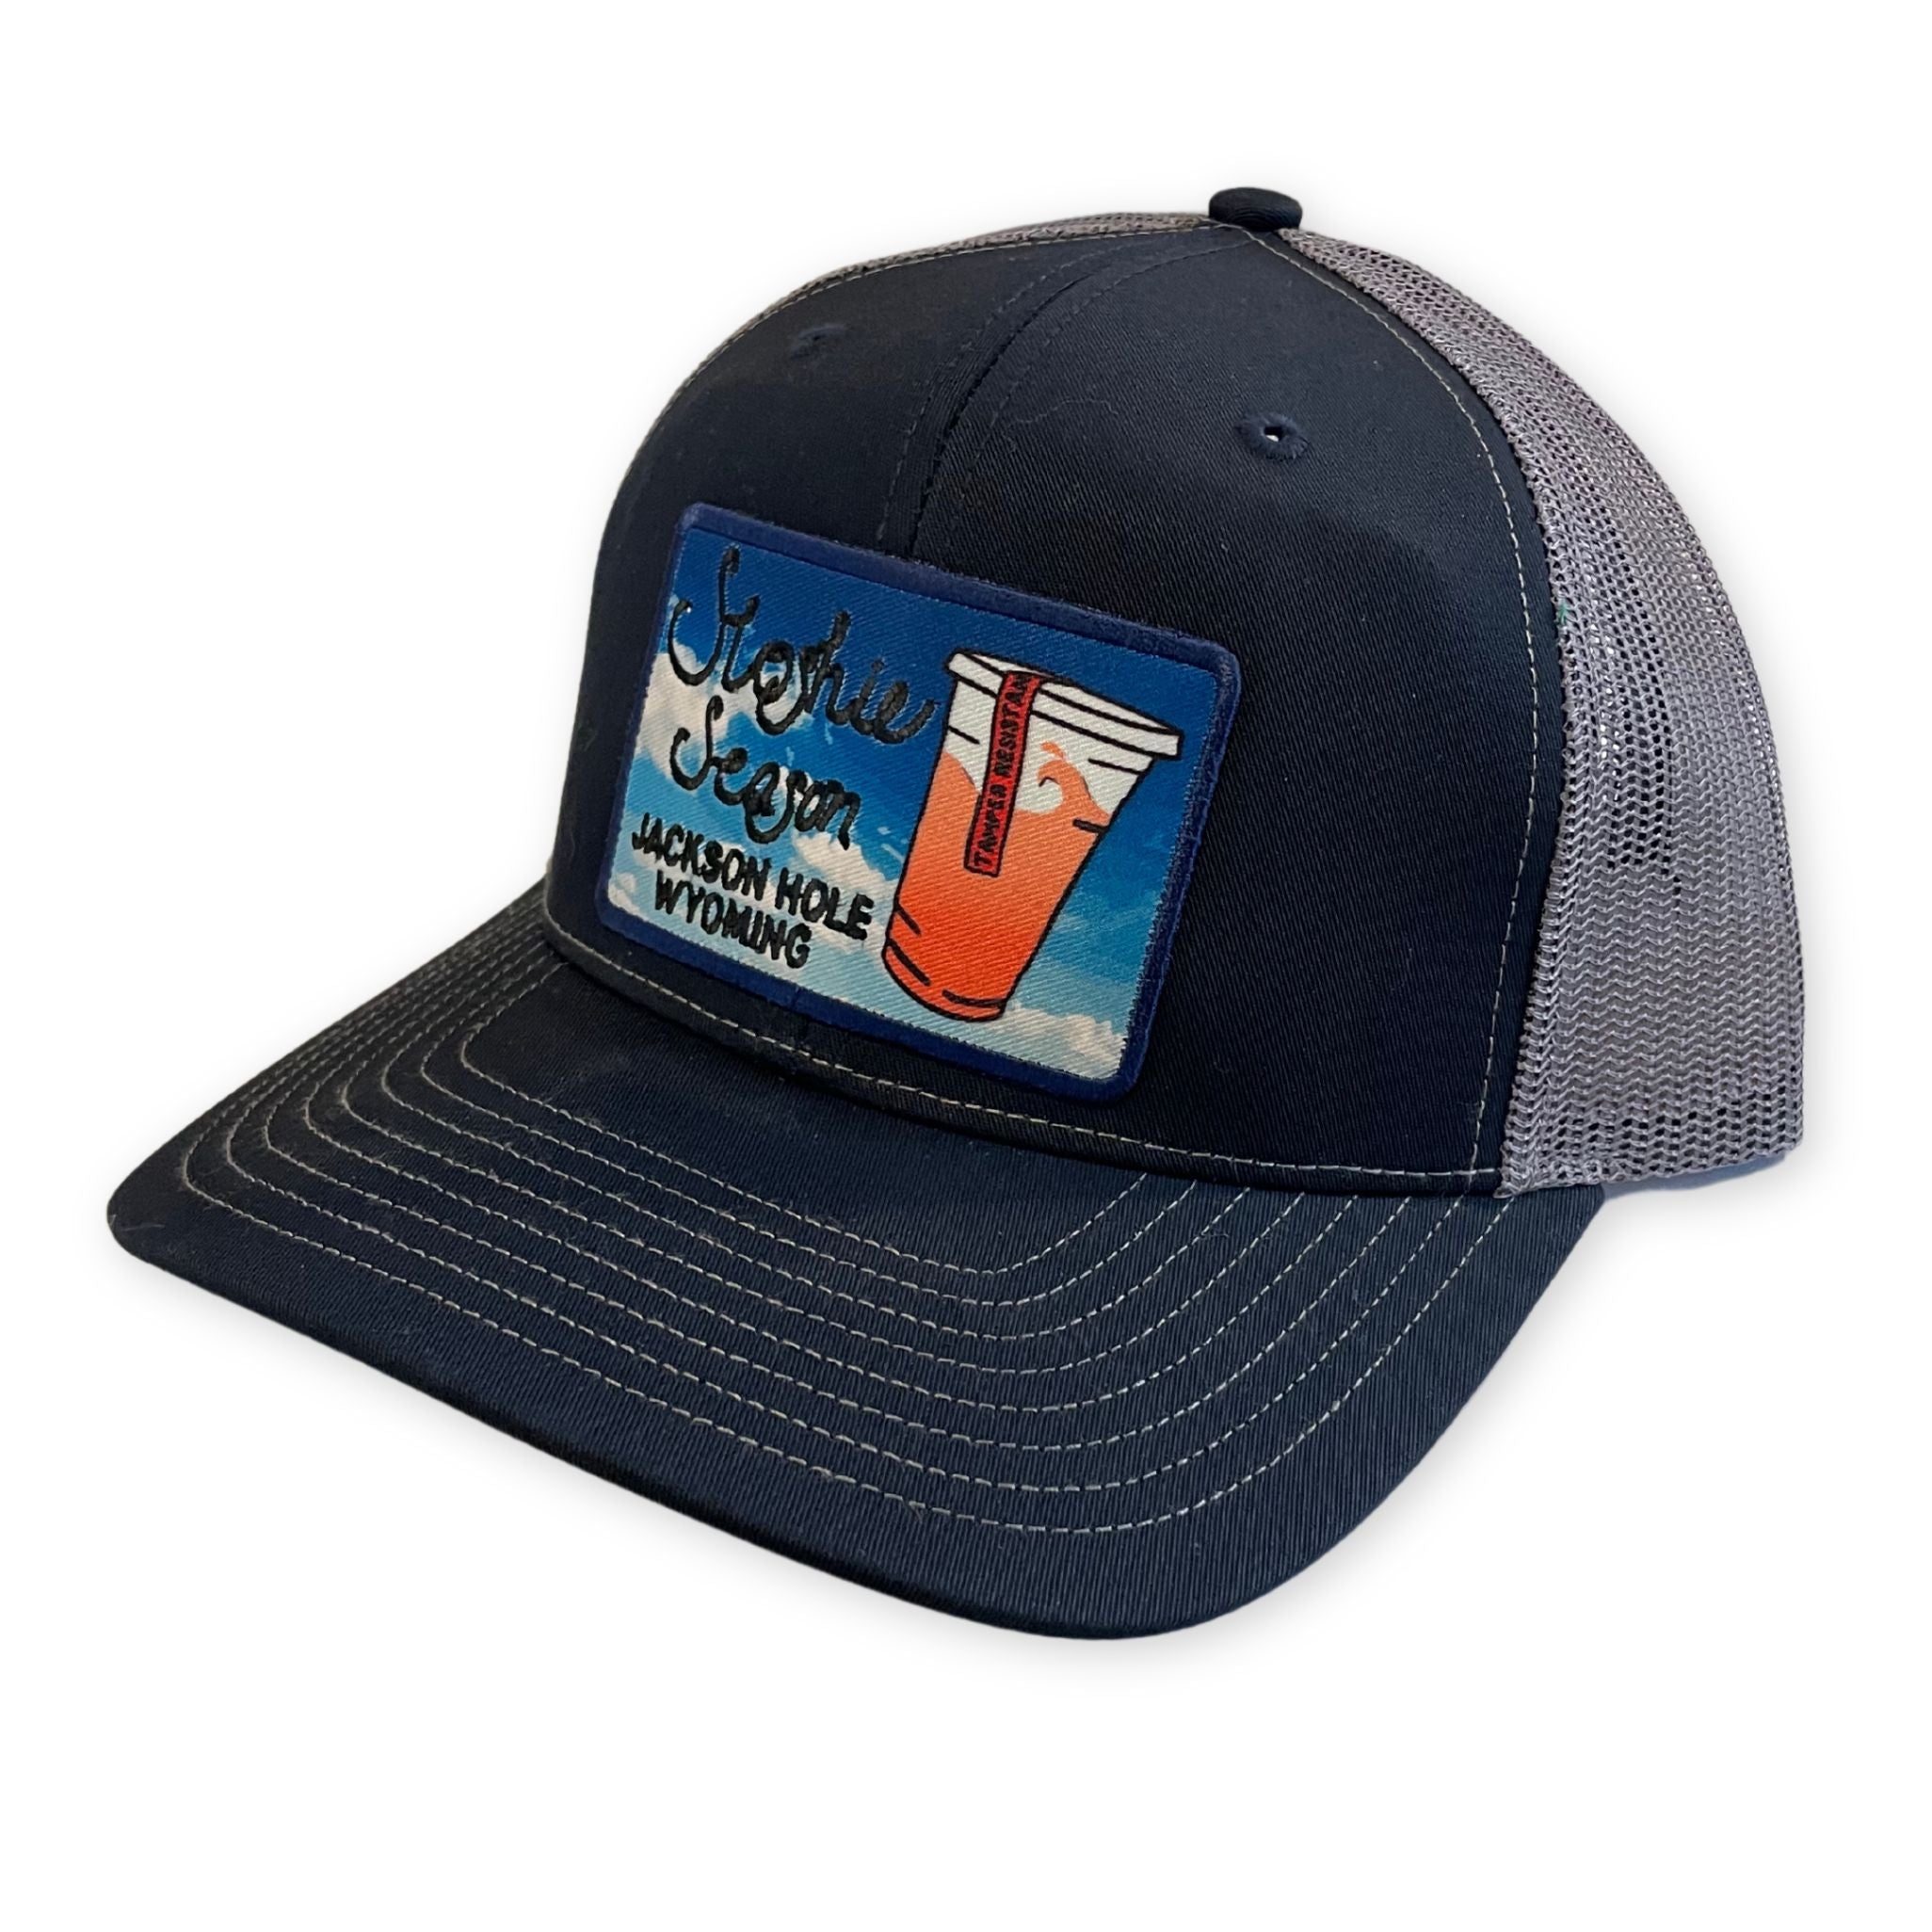 Navy Trucker Hat with Grey Mesh back and a Sloshie Season Patch 